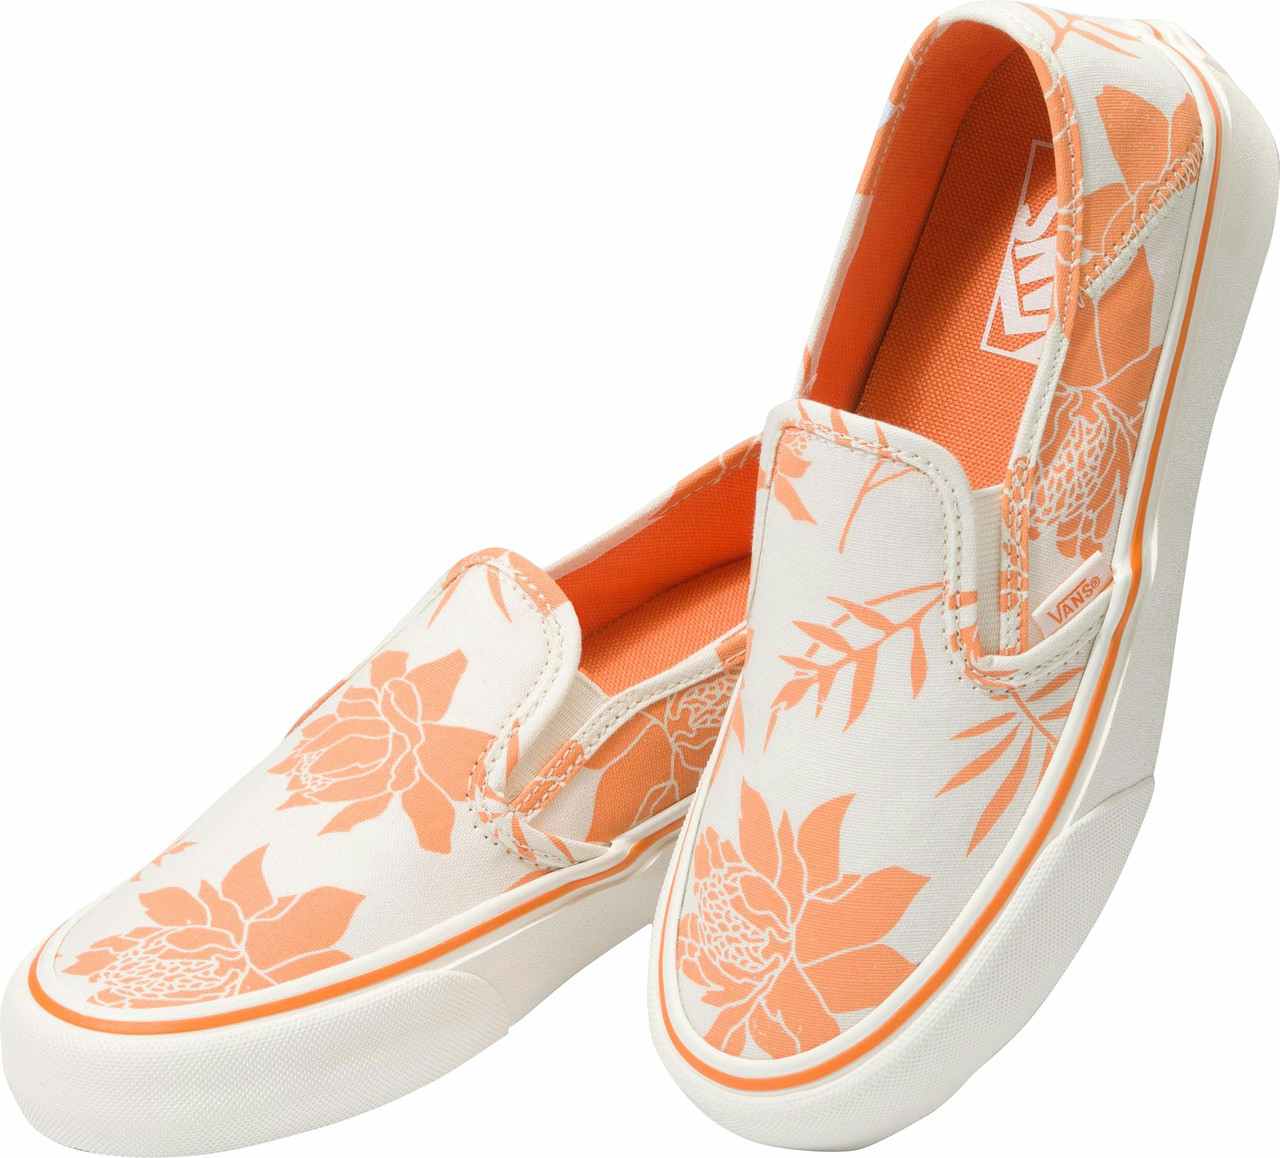 Chaussures UA Slip-On SF Fleurs insulaires/soleil